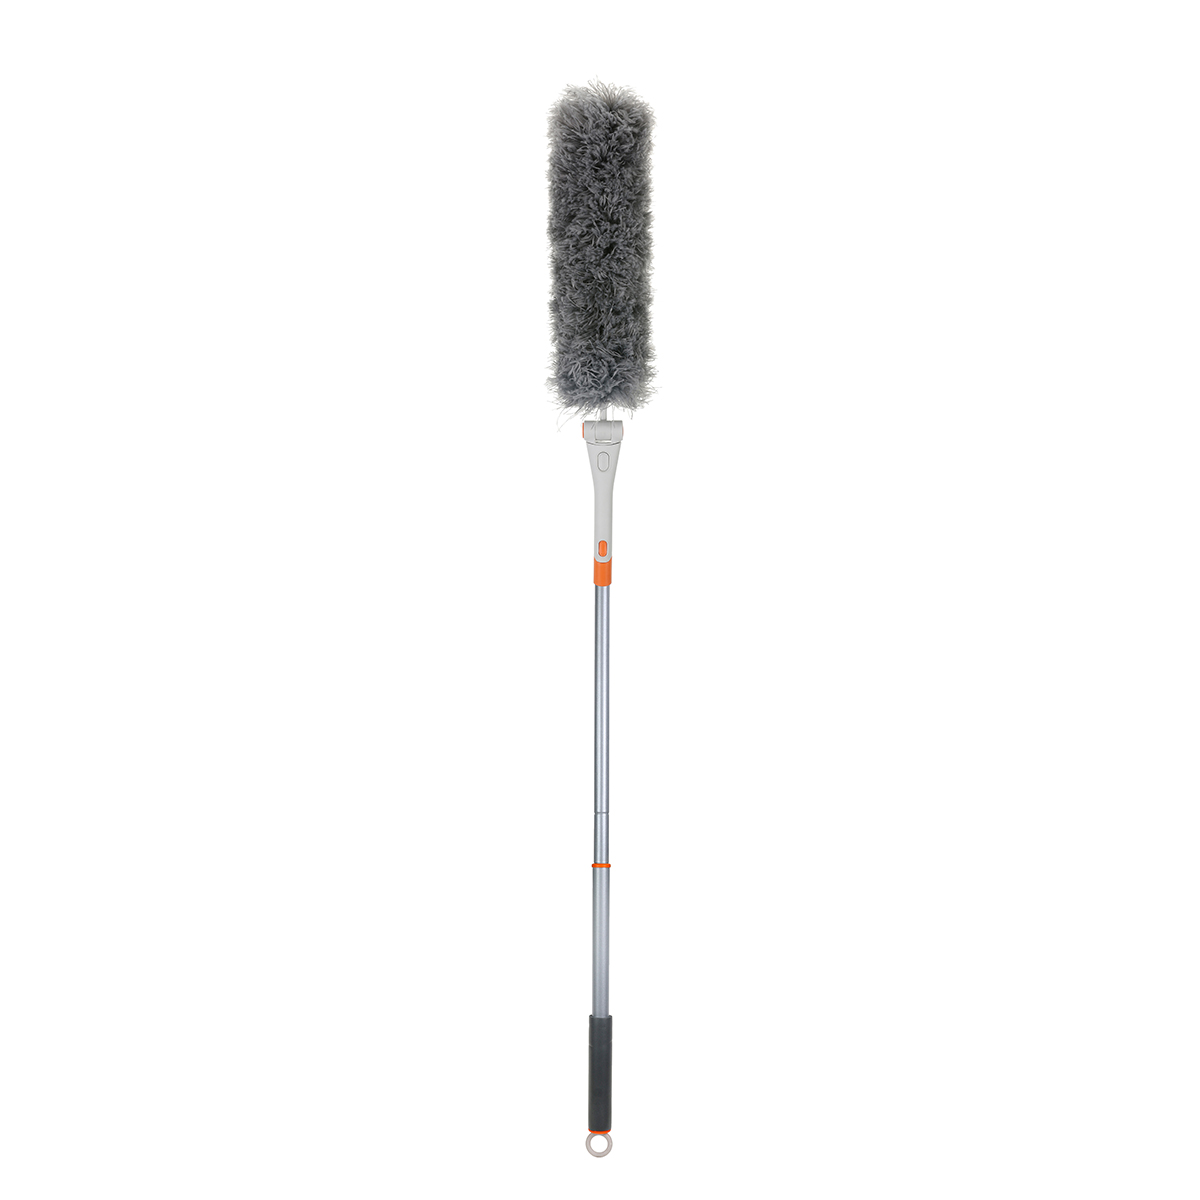 MATCC-Microfiber-Feather-Dusters-with-270deg-Rotation-Head-Extension-Pole-for-Cleaning-Tool-1878218-7